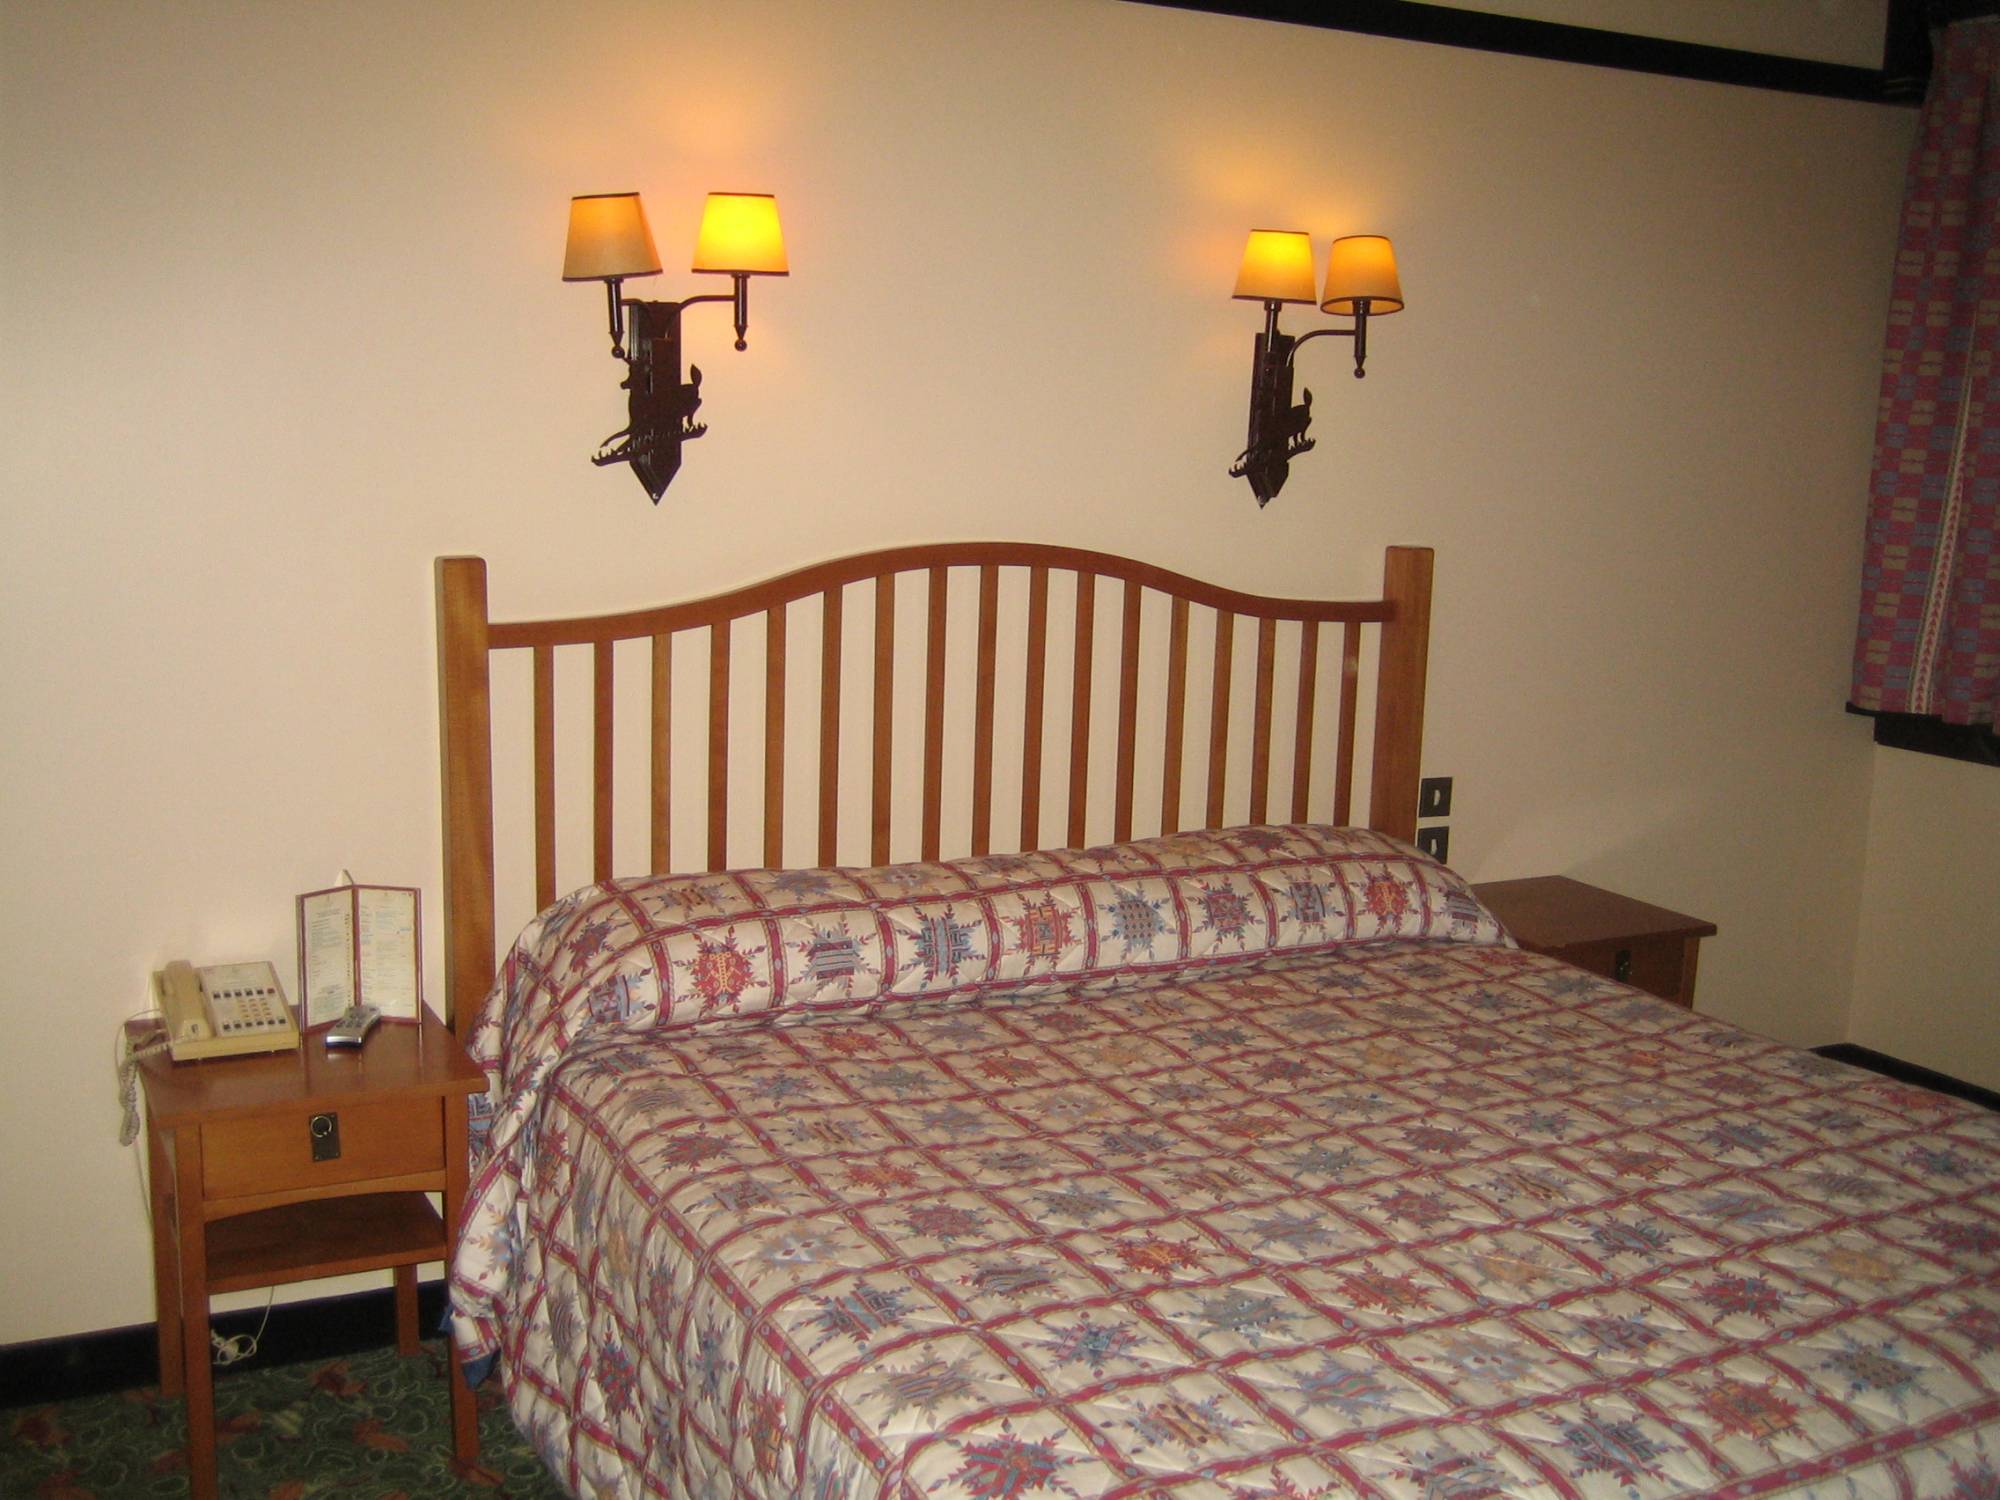 Kingsize bed in Montana room at Sequoia Lodge